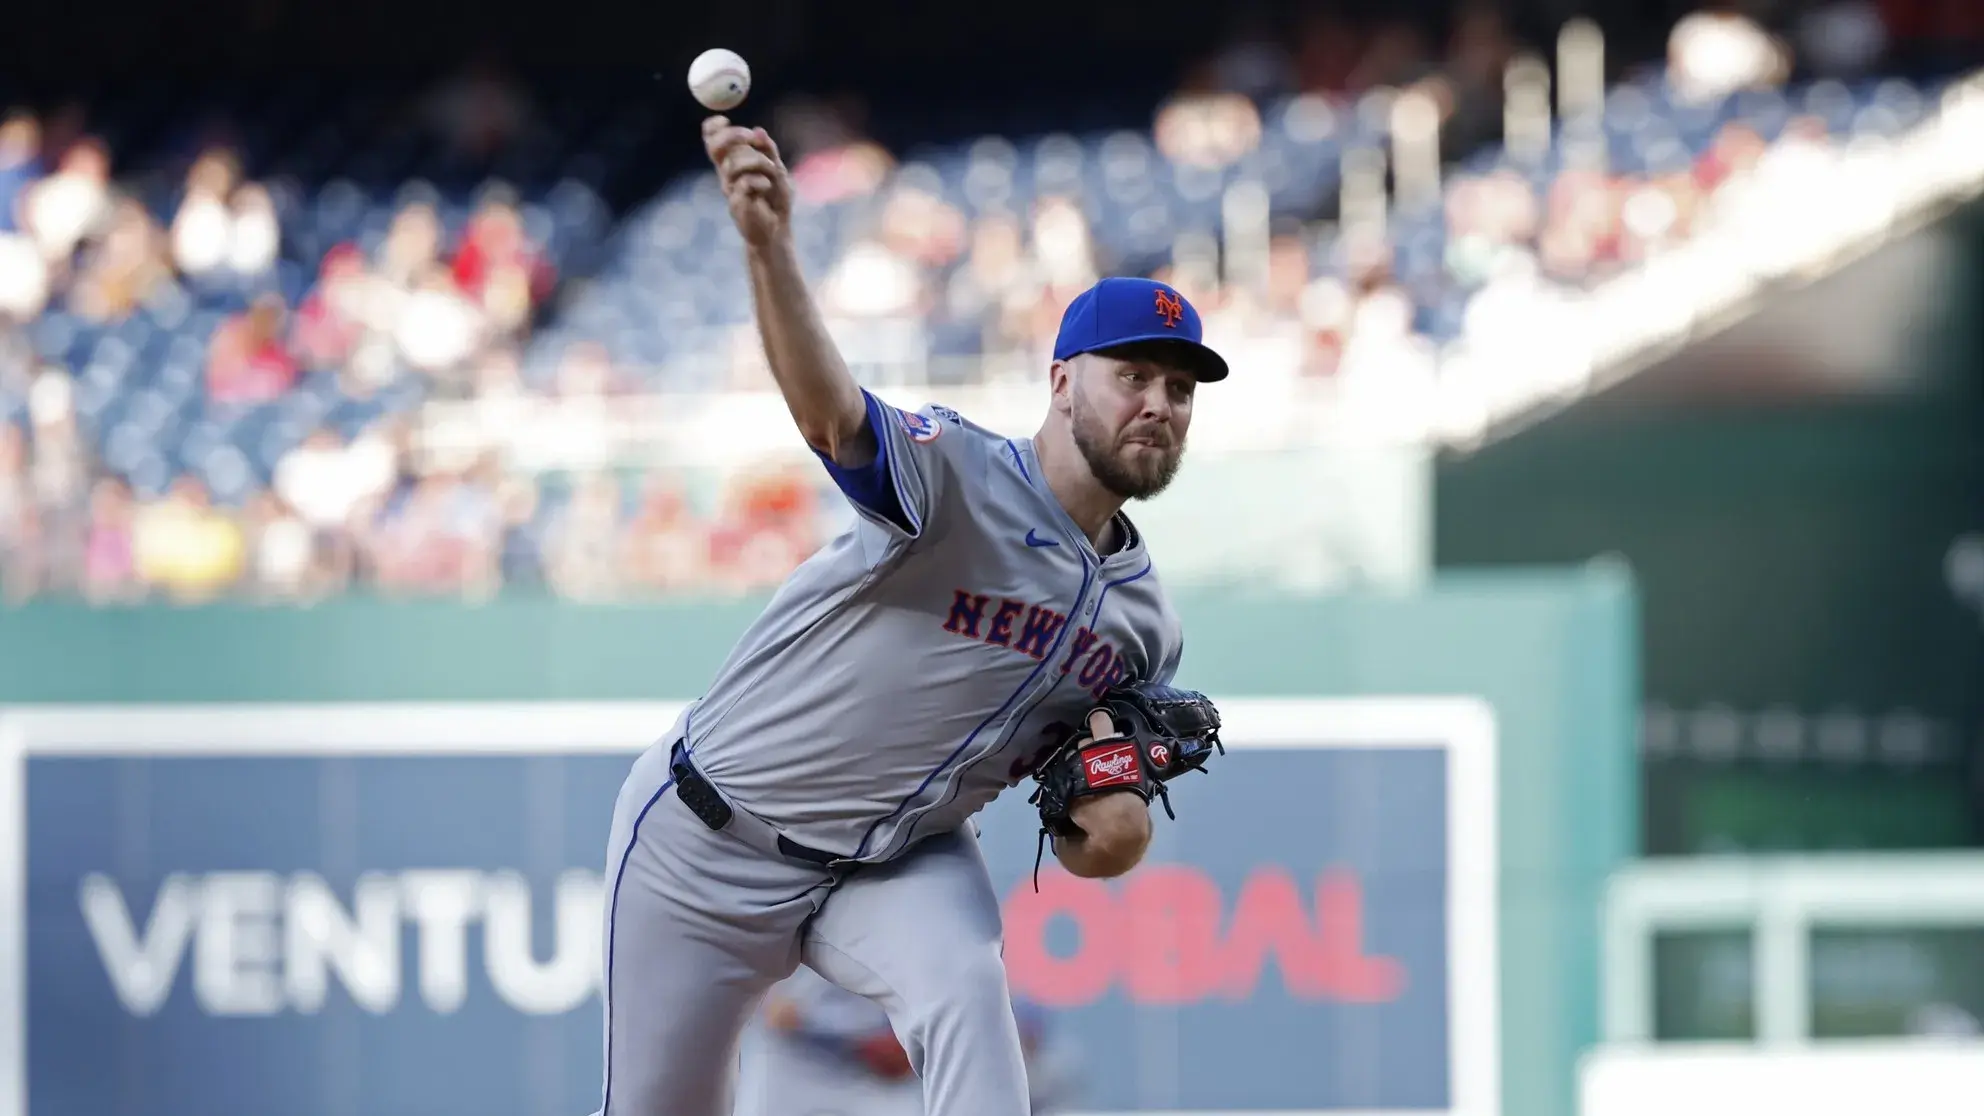 New York Mets starting pitcher Tylor Megill (38) pitches against the Washington Nationals during the first inning at Nationals Park. / Geoff Burke-USA TODAY Sports